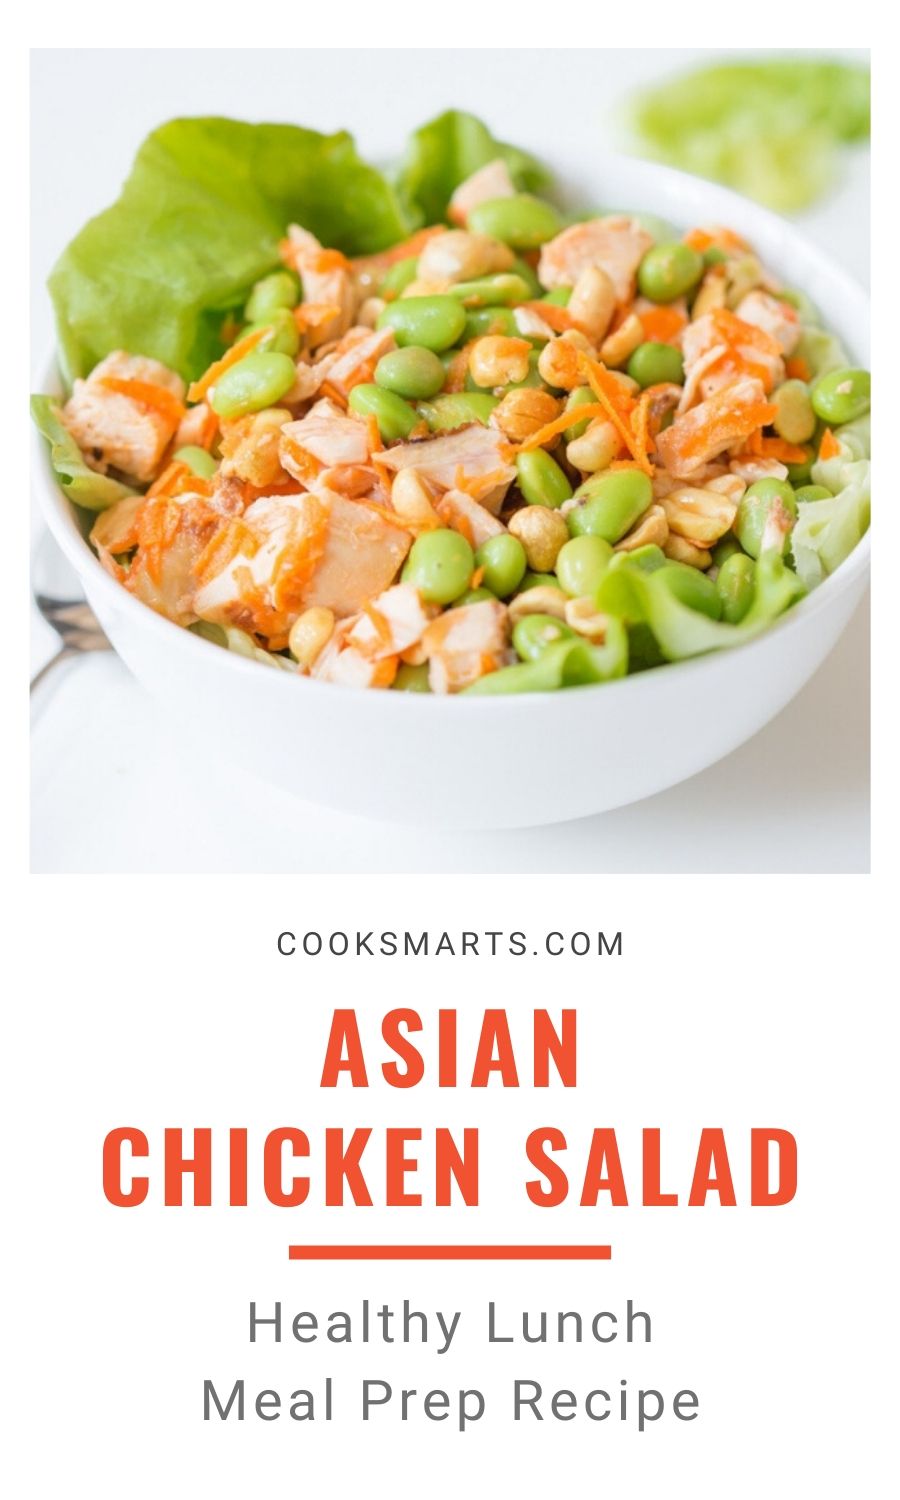 Healthy 20 Minute Lunch: Asian Chicken Salad | Cook Smarts